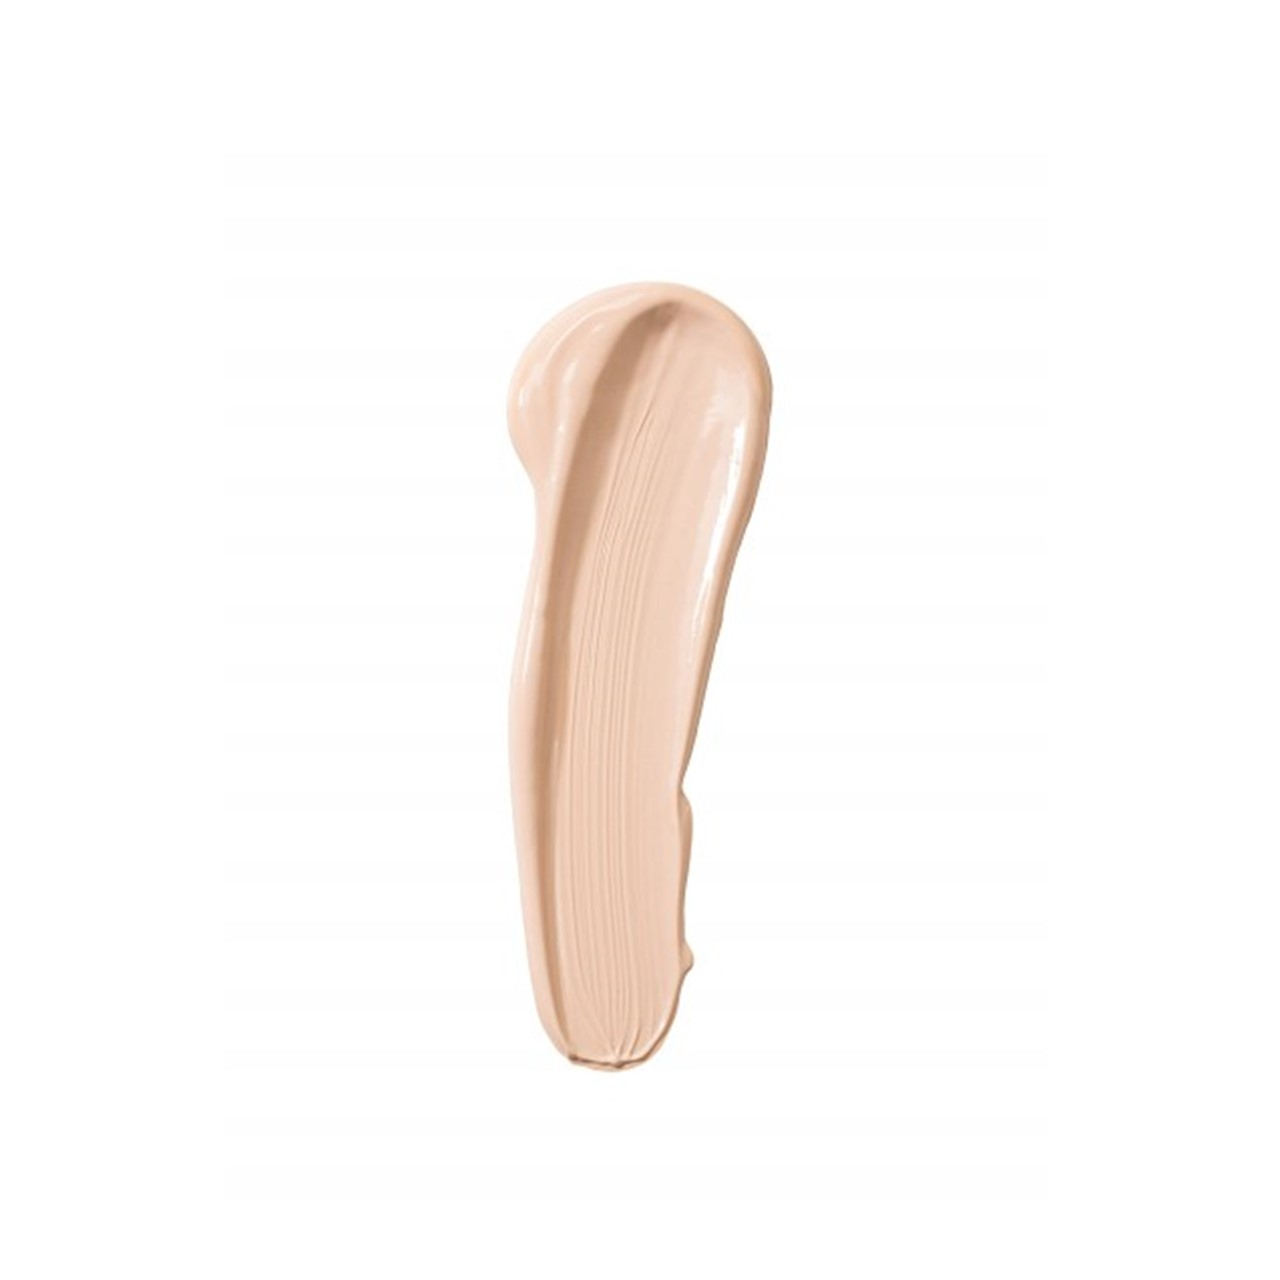 Flormar Perfect Coverage Foundation SPF 15 - Foundation